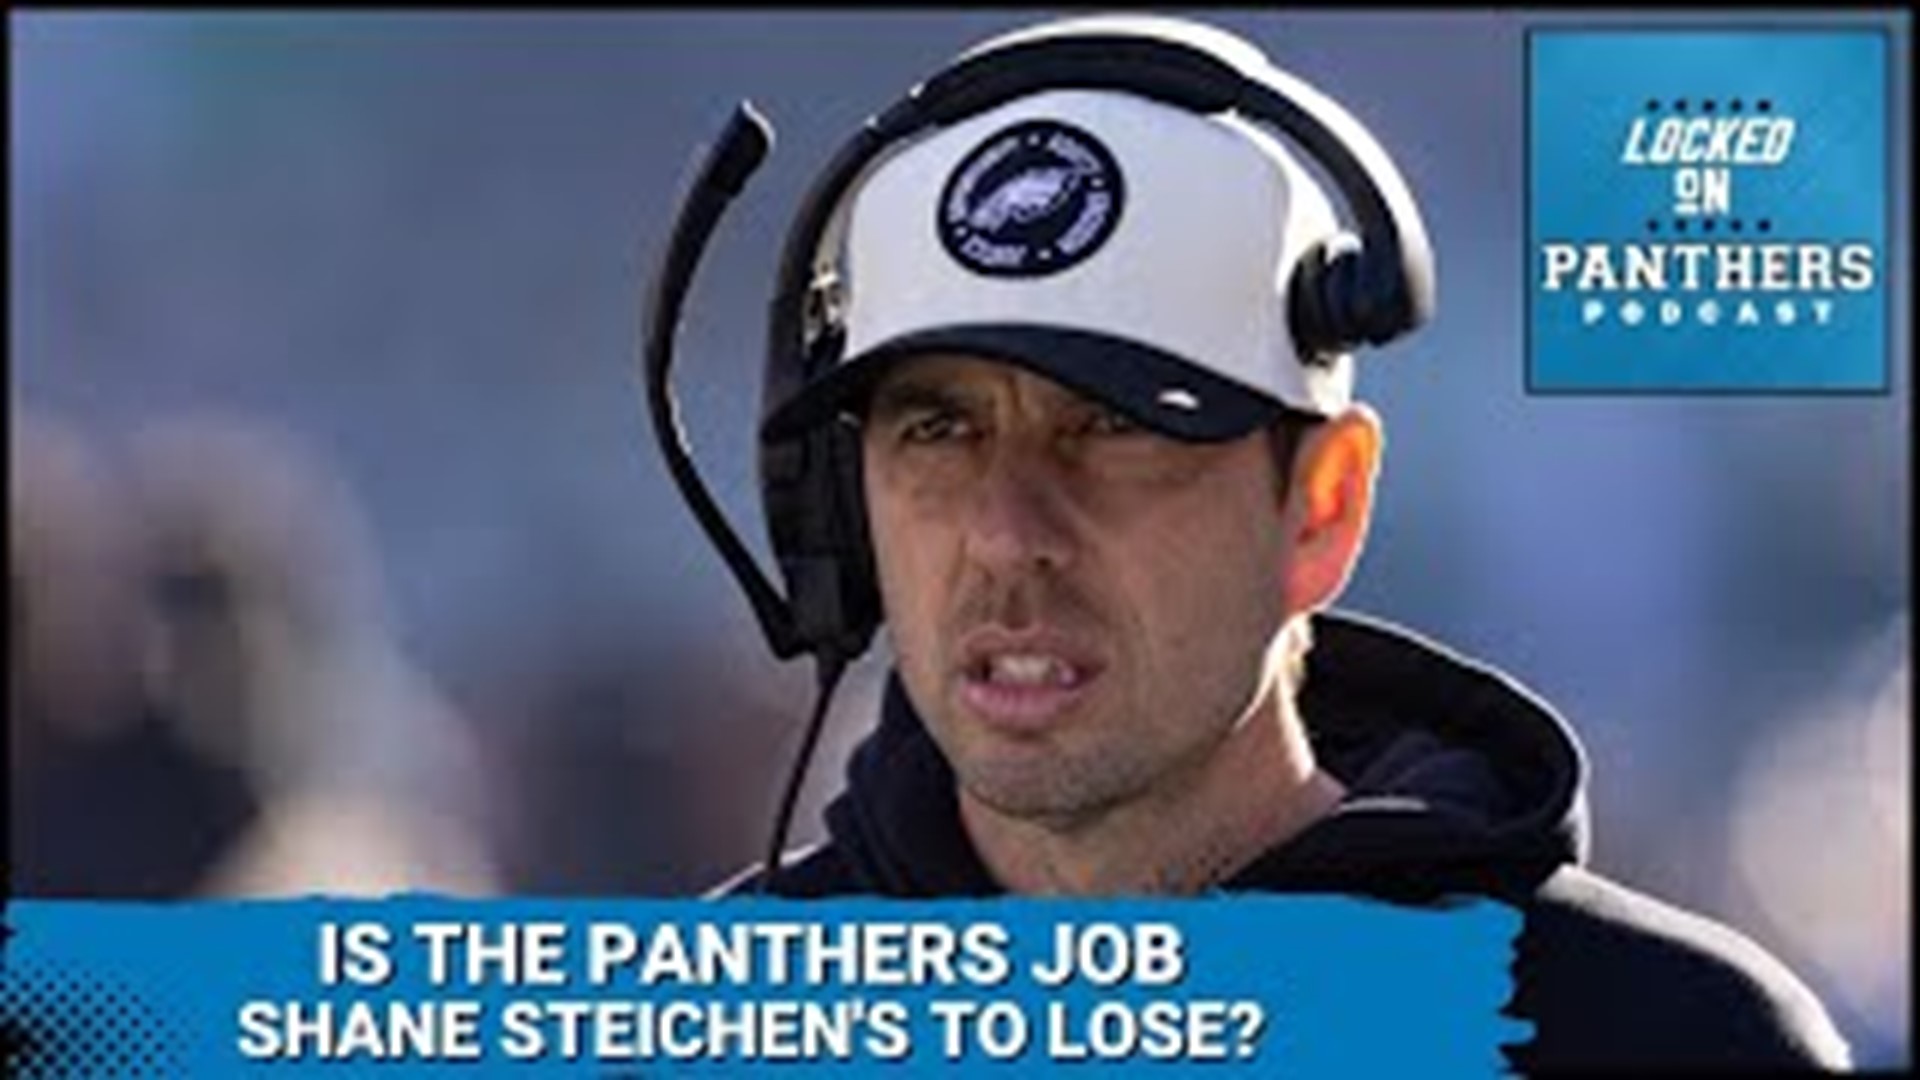 The organization has yet to make their intentions known on who the favorite for the job is three weeks into the search. That and more on Locked On Panthers.